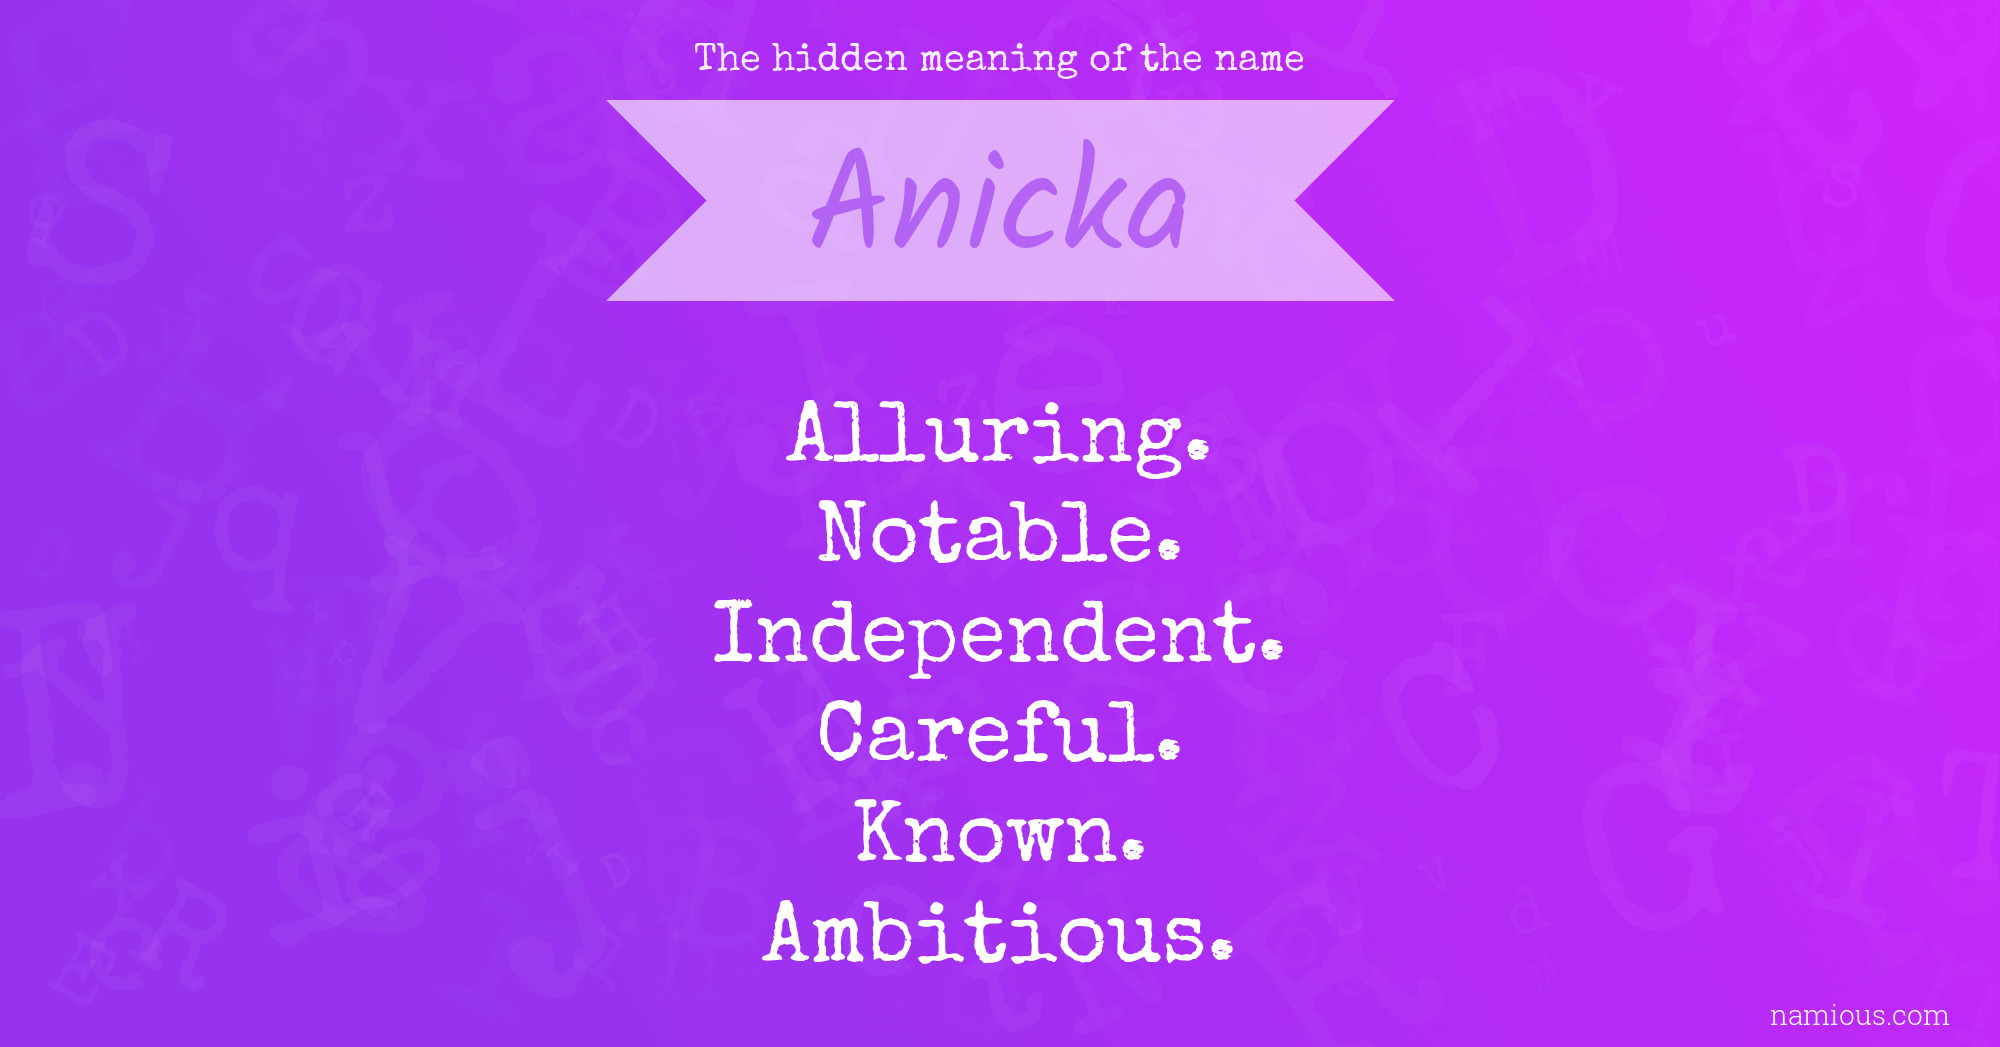 The hidden meaning of the name Anicka